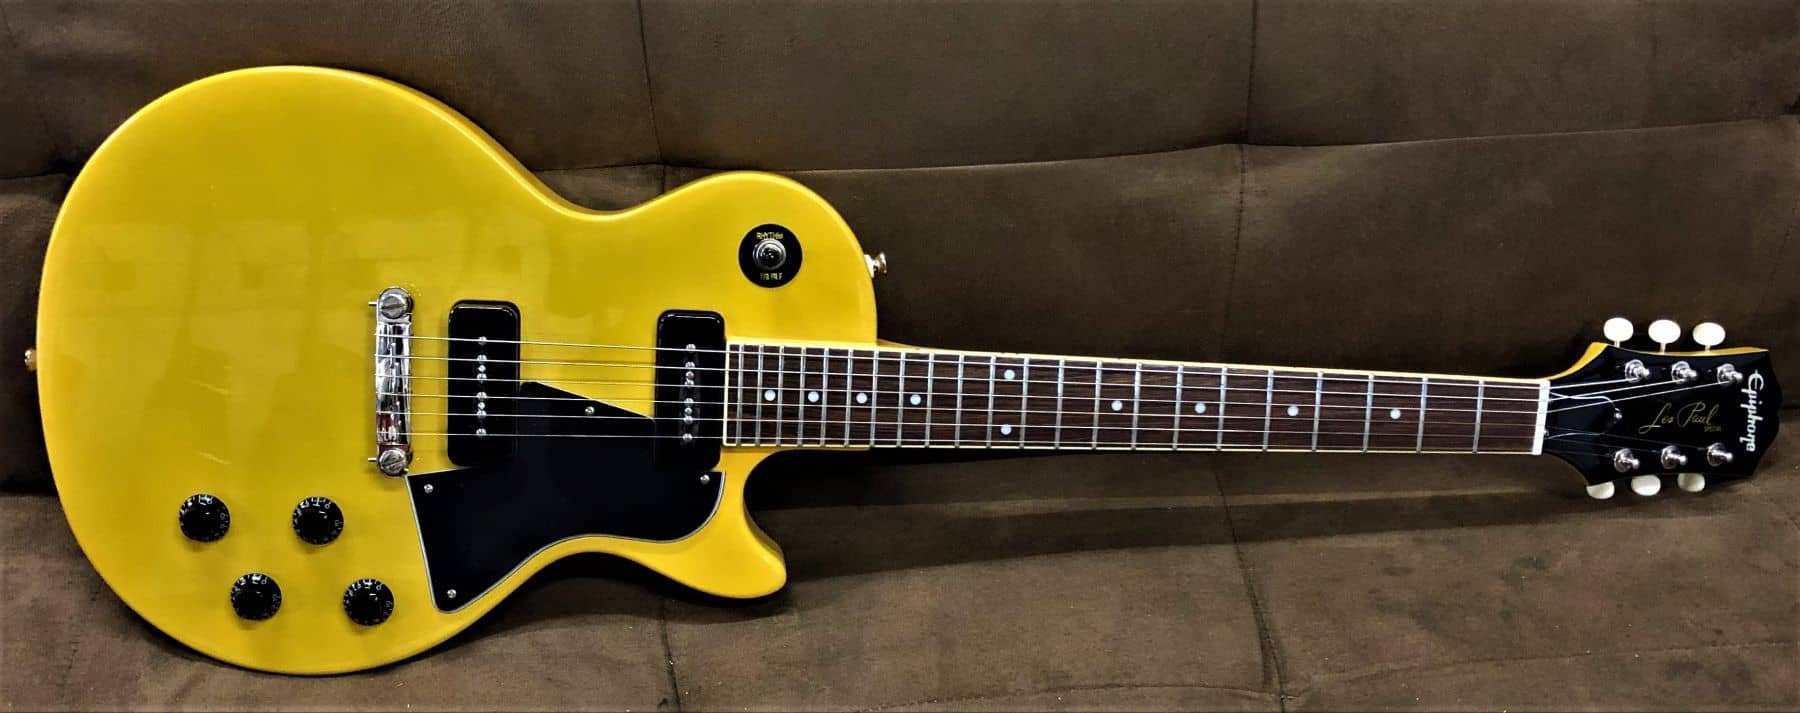 Sold ... Epiphone Les Paul Special - TV Yellow - Black Dot Music